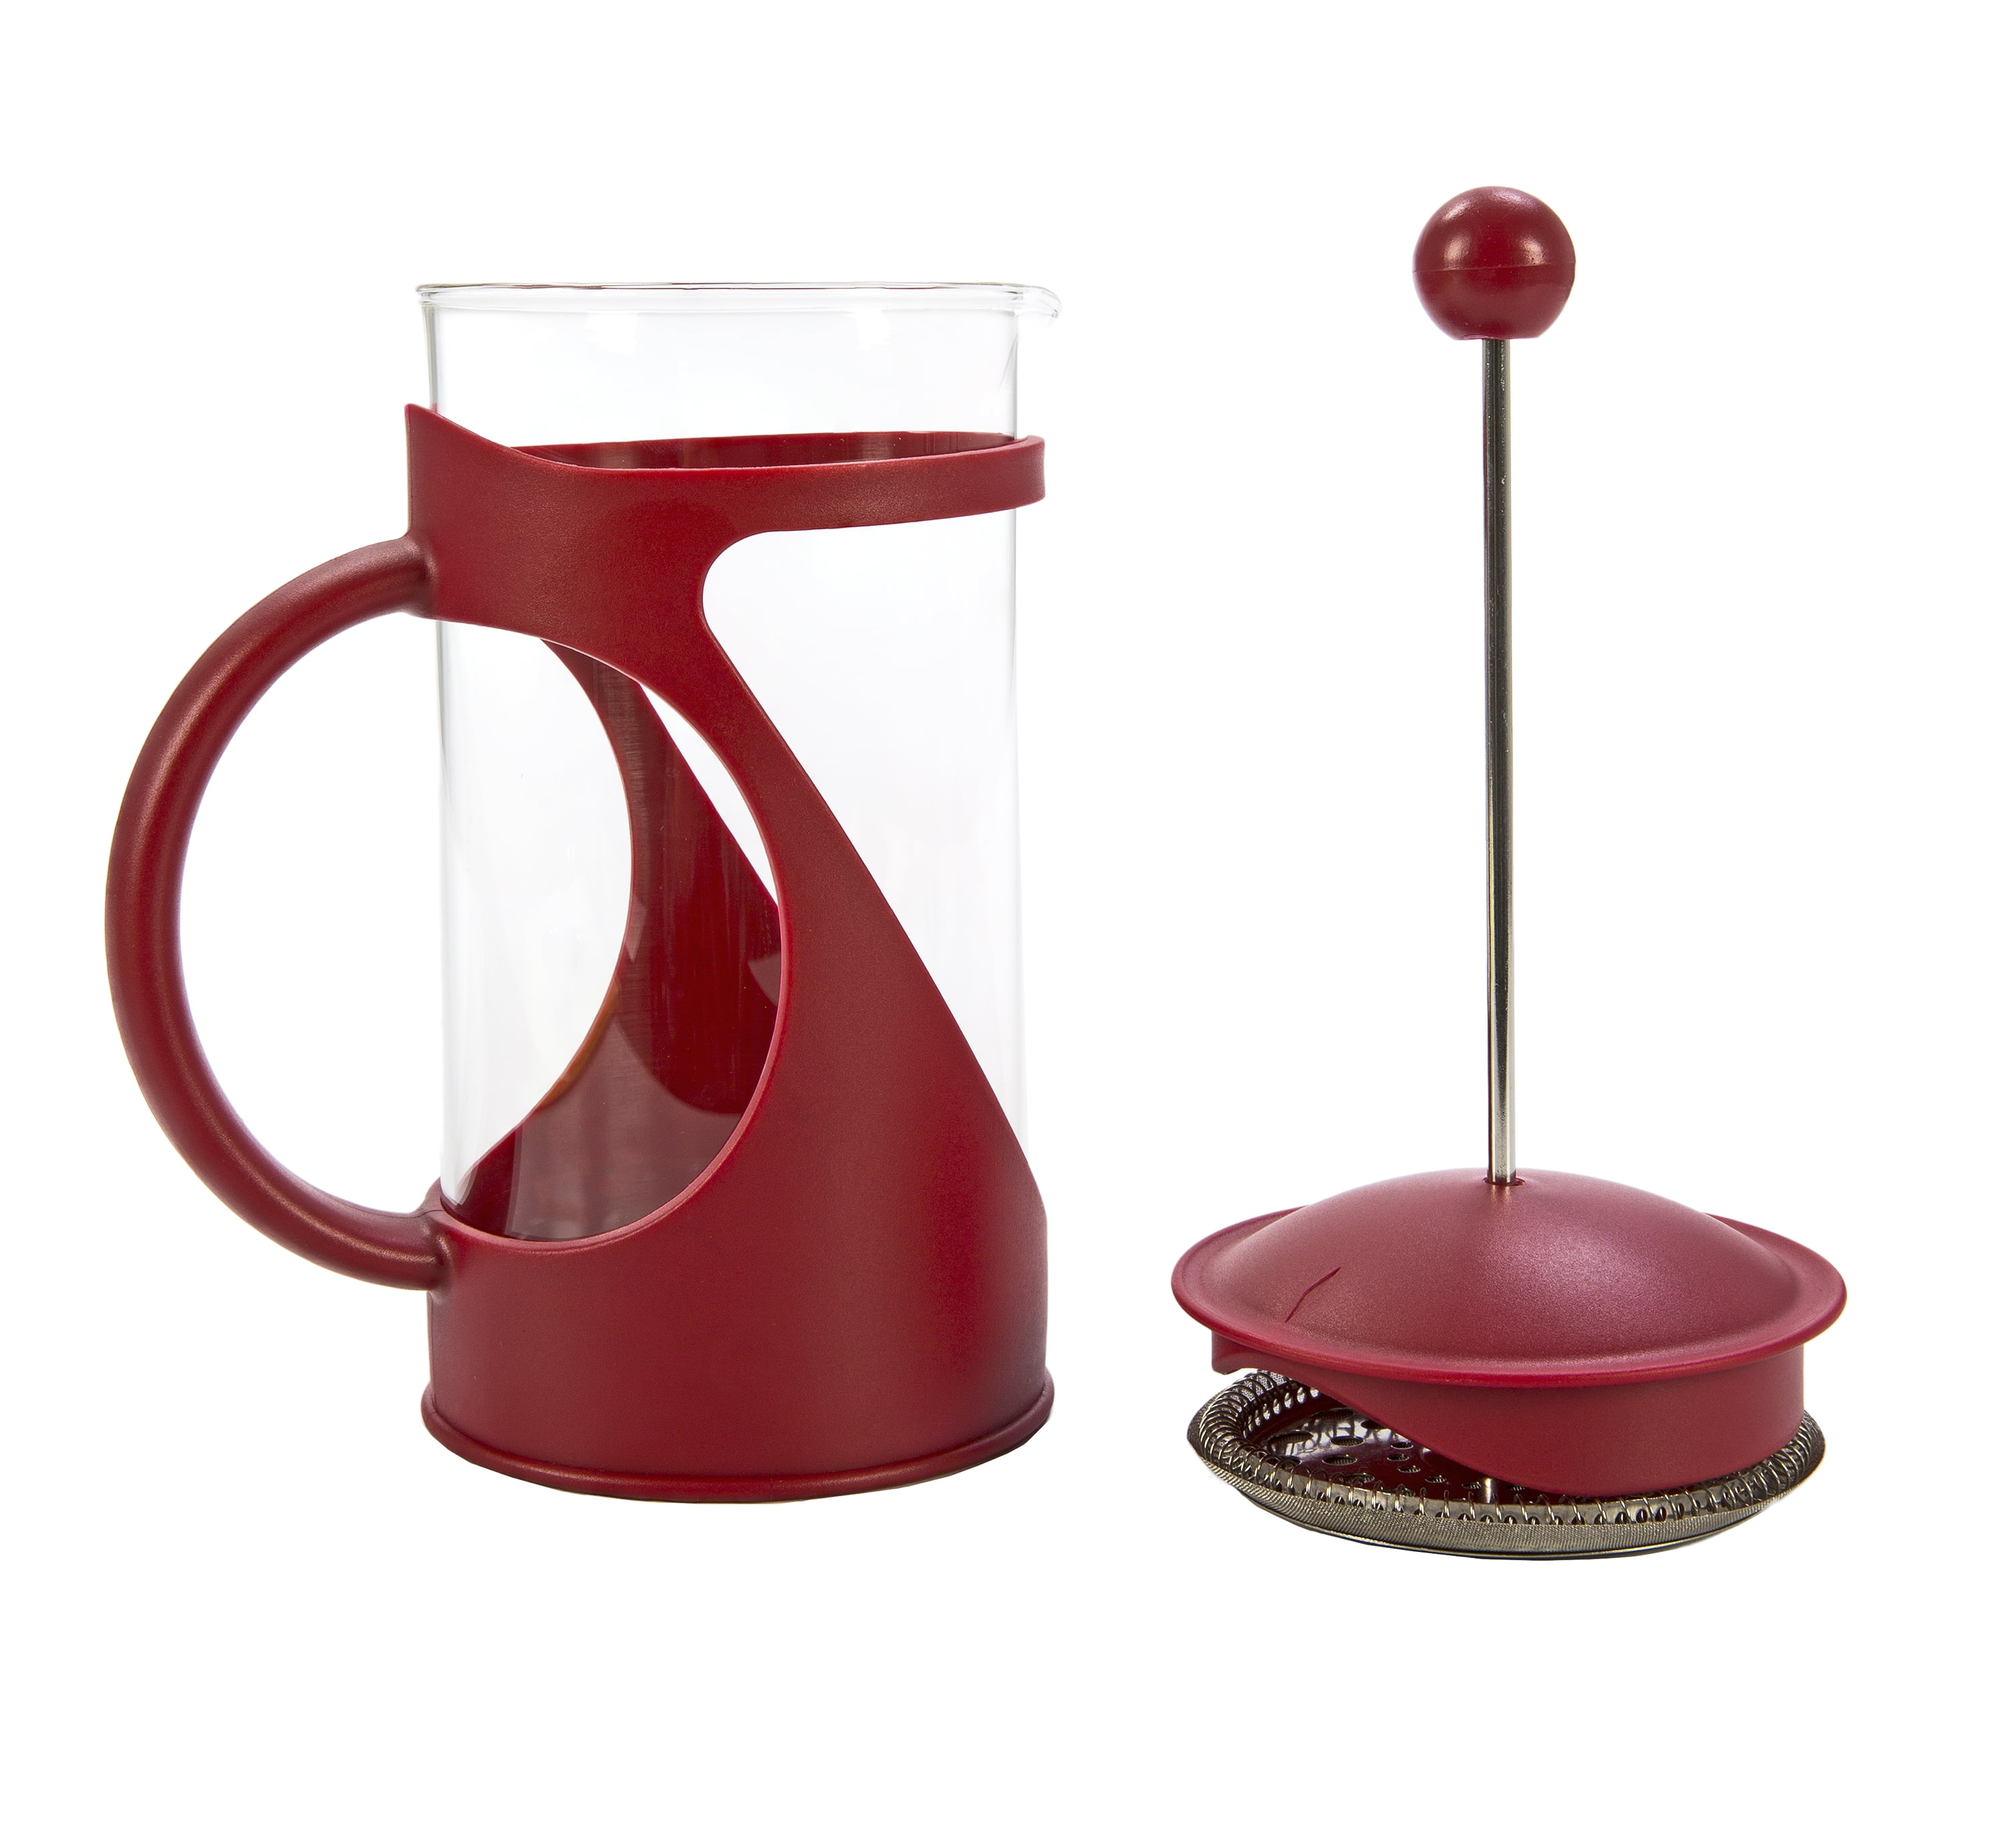 BonJour Ceramic French Press, 8-Cup, Red Stripes 